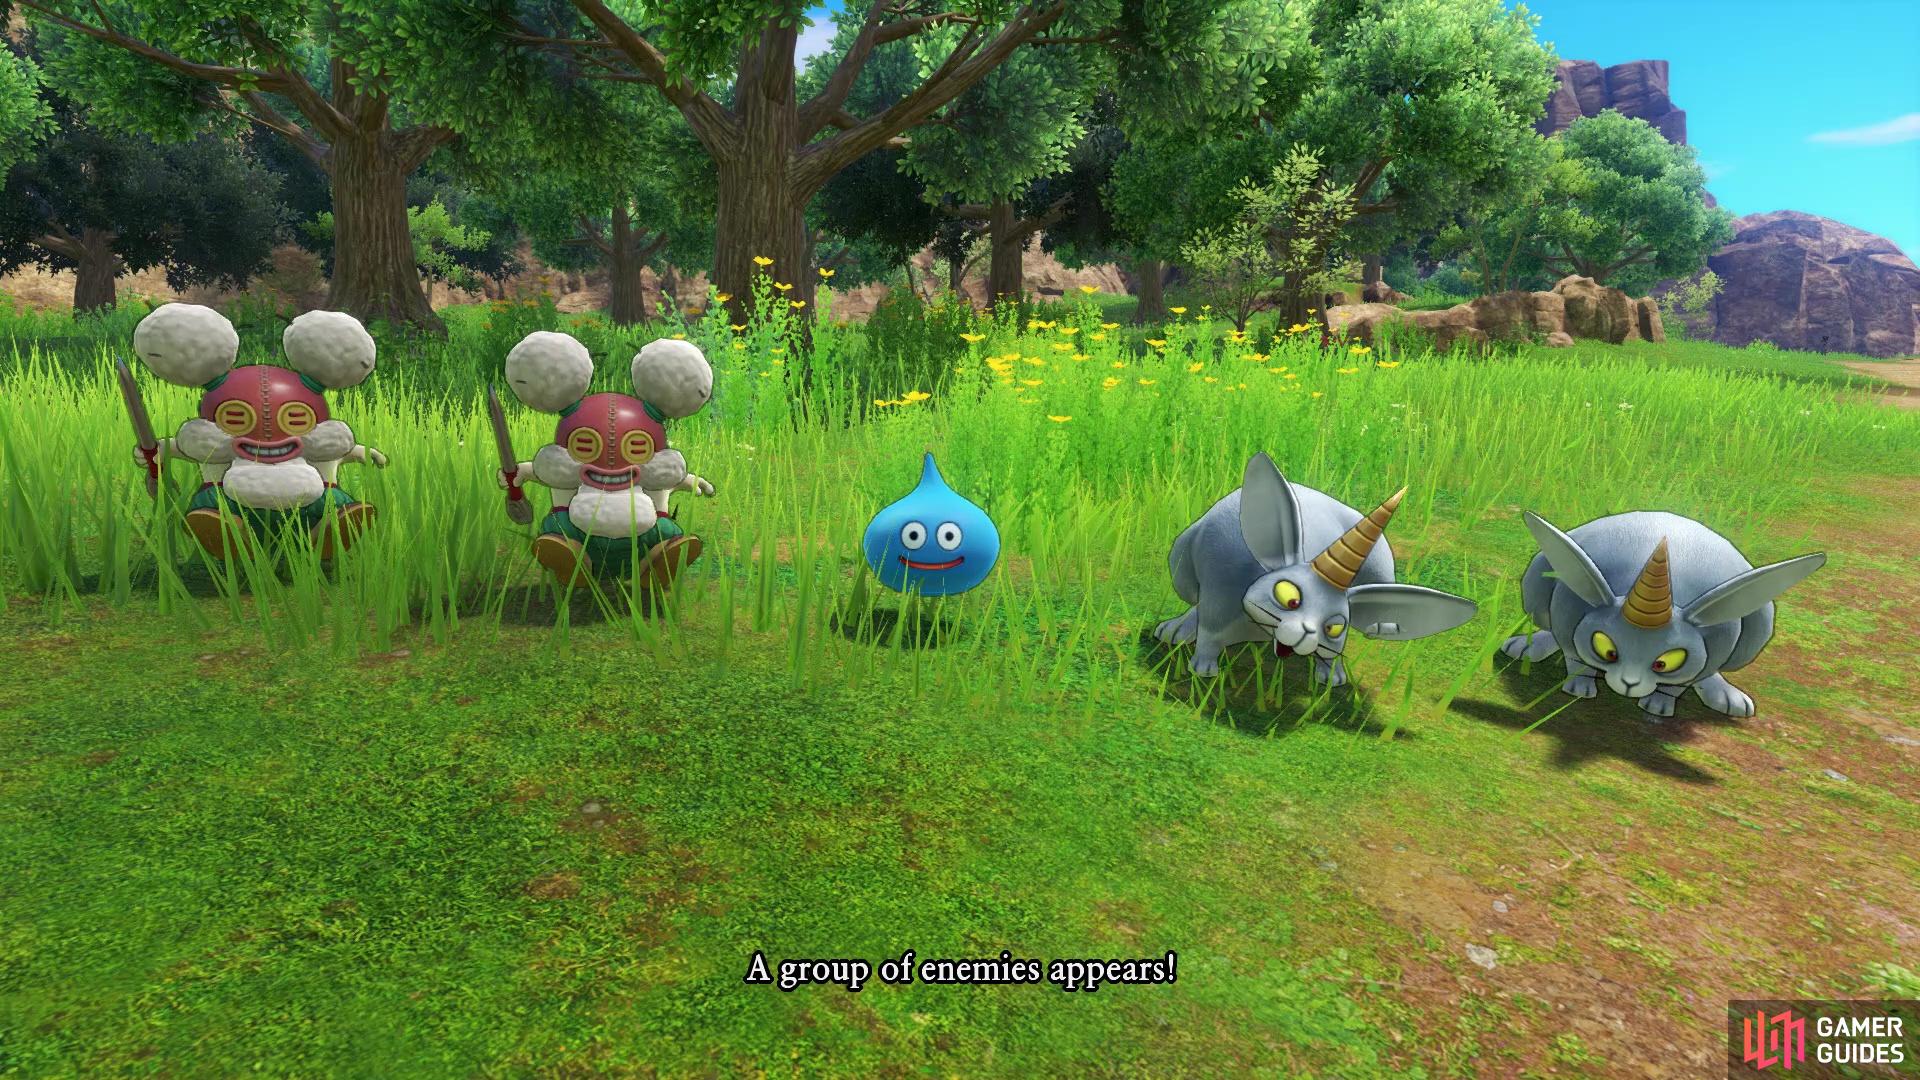 Dragon quest 11 bunny tail